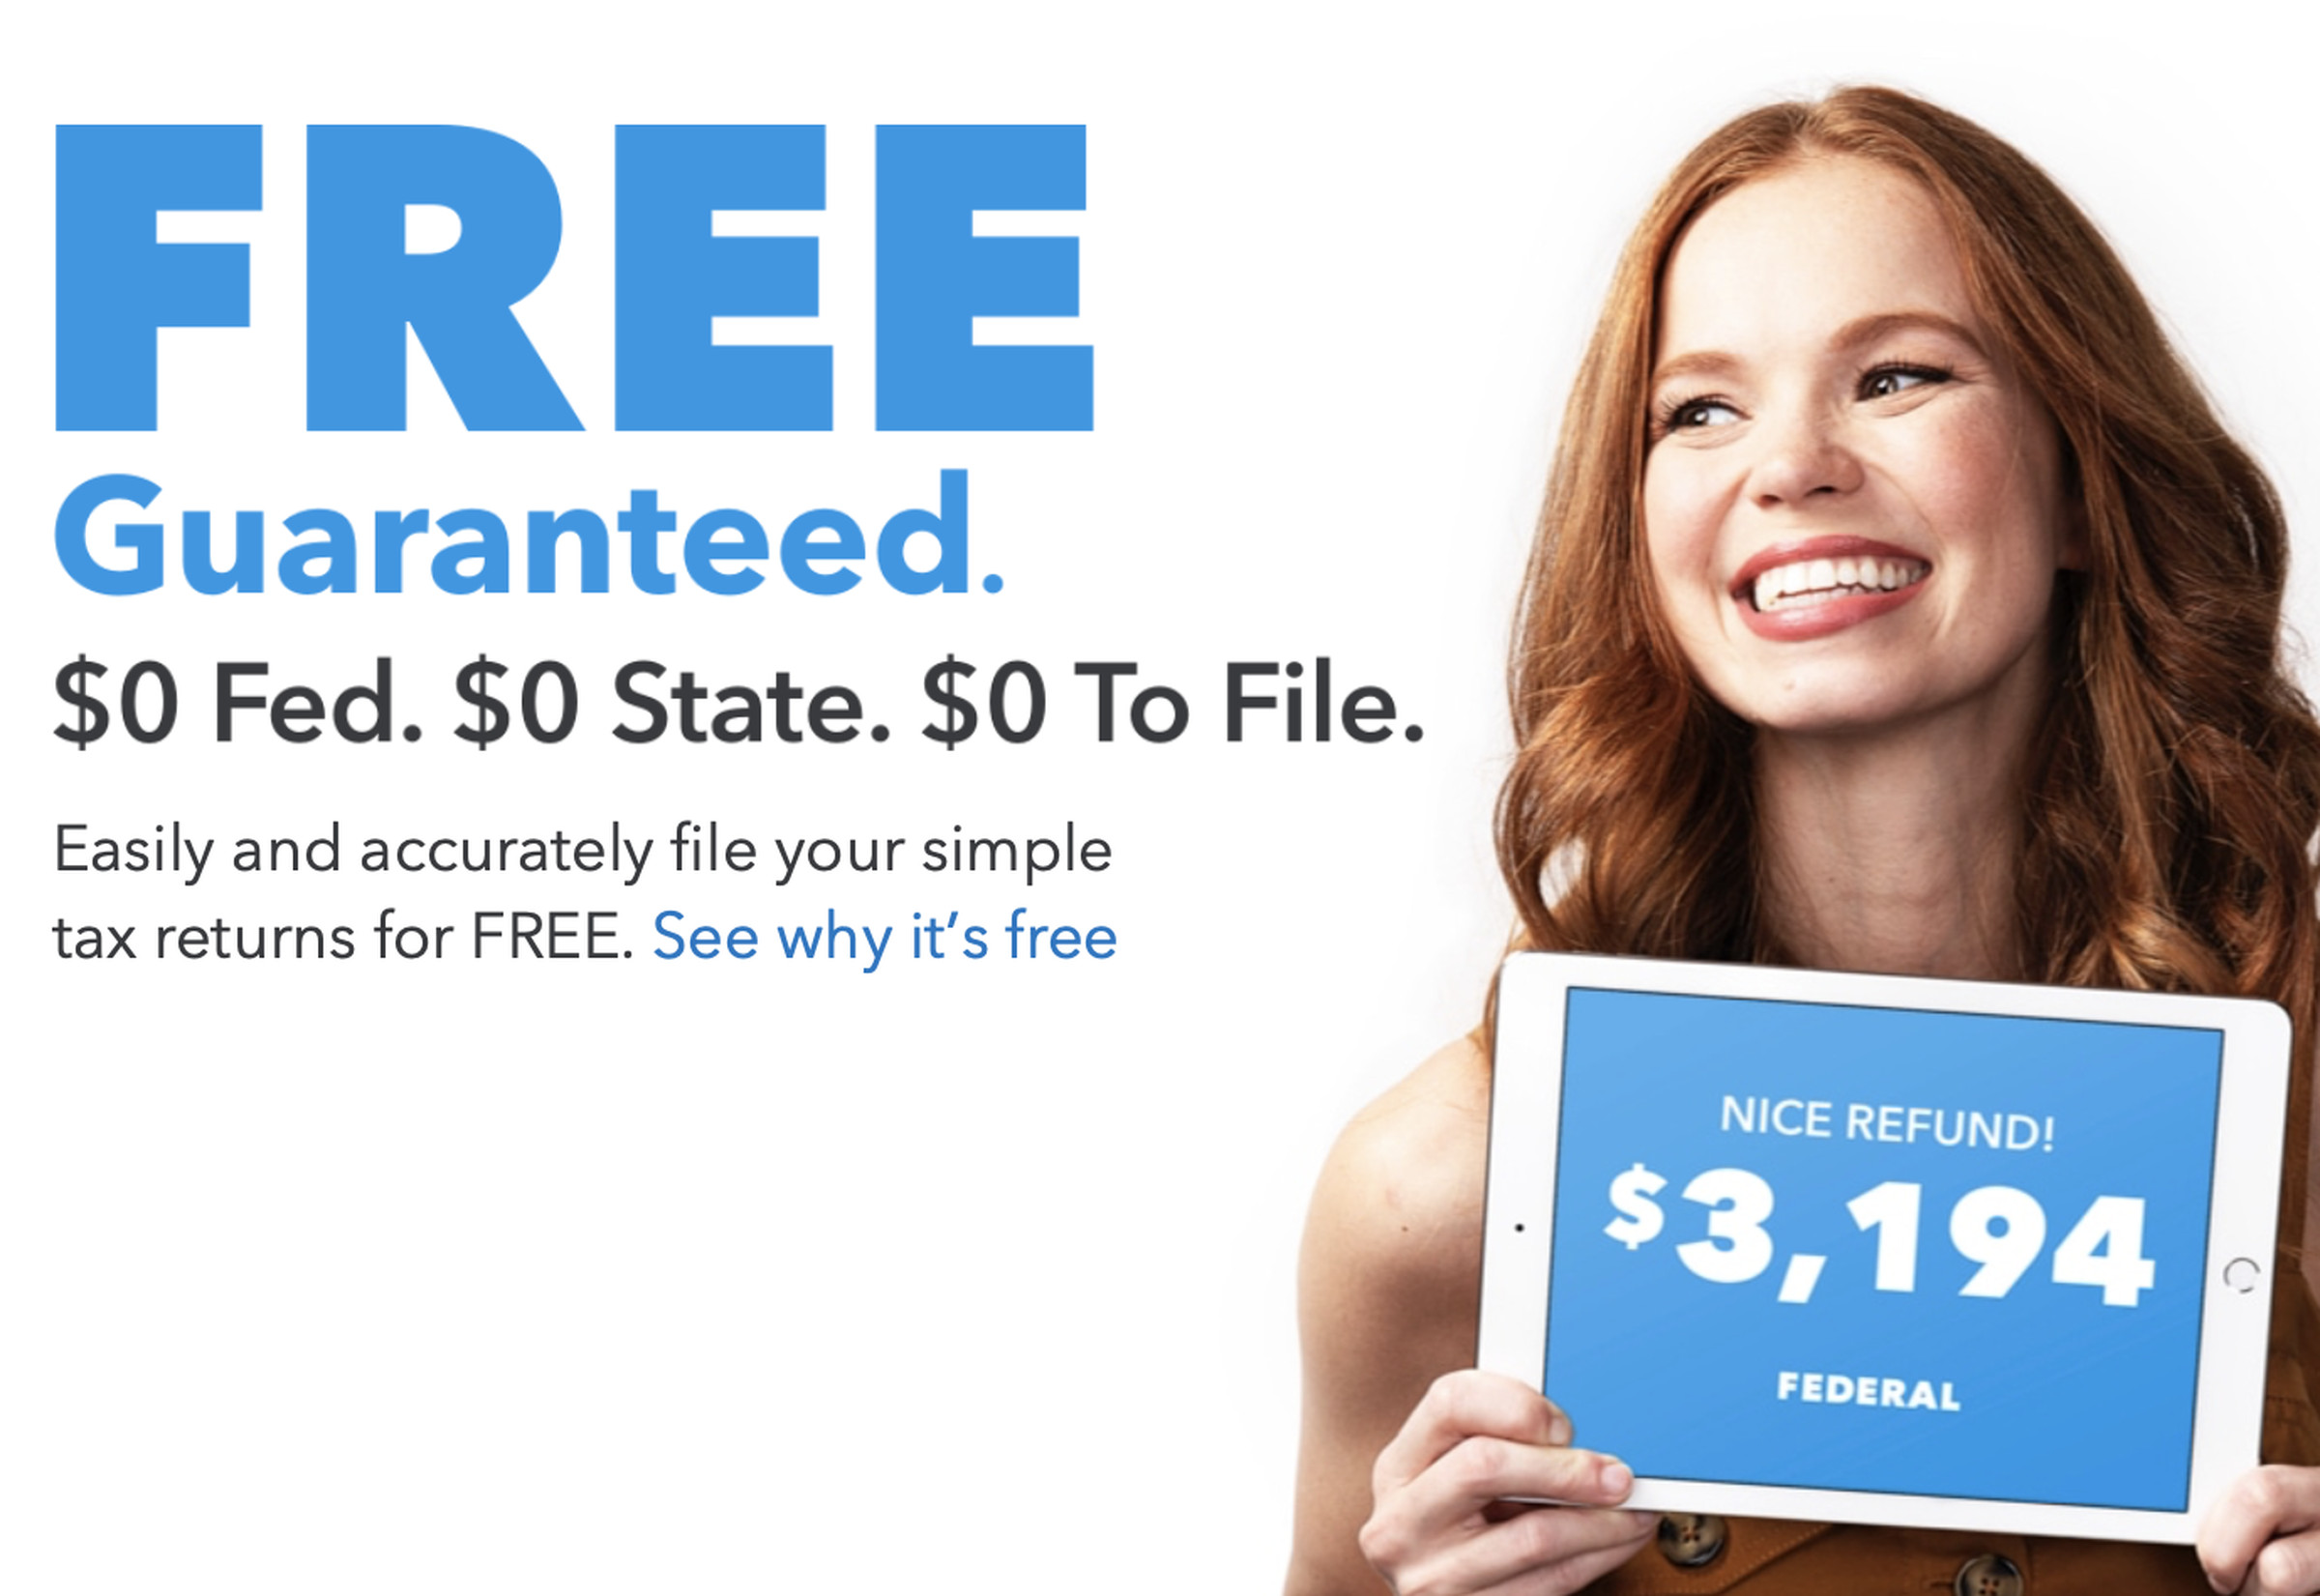 Intuit advertises TurboTax’s main service as being free, but it rarely is by the time you’re done filing.